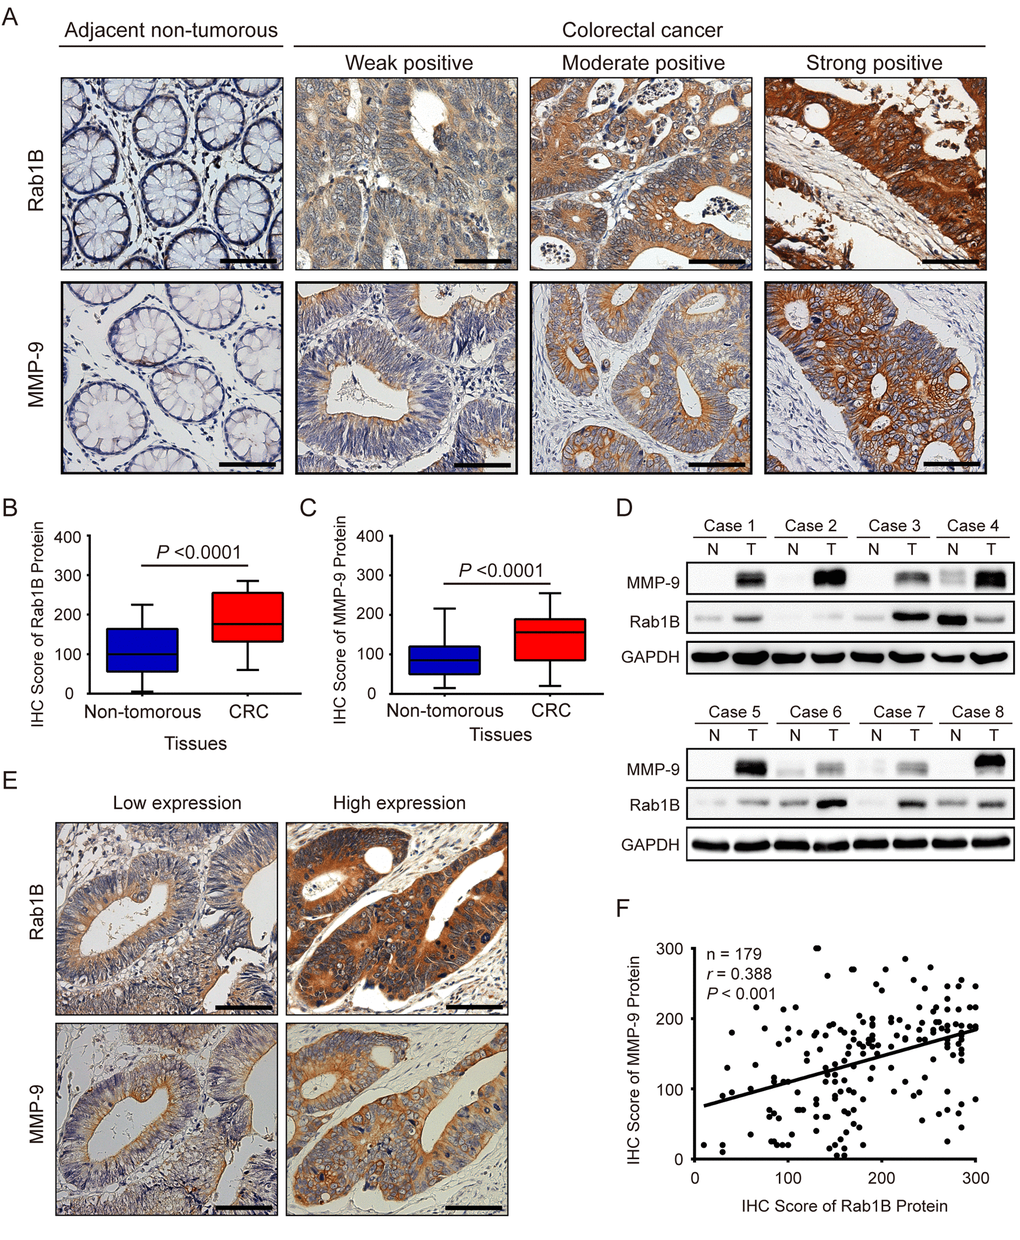 Rab1B and MMP9 expressions are significantly increased in colorectal cancer tissues. (A) Shown are representative immunohistochemistry (IHC) staining of Rab1B and MMP9 in CRC and adjacent non-tumor tissues. Scale bars represent 50 μm. (B) Comparison of Rab1B protein expressions between CRC tissues and matched adjacent non-tumorous tissues. (C) Comparison of MMP9 protein expressions between CRC tissues and matched adjacent non-tumorous tissues. (D) The expression levels of Rab1B and MMP9 proteins in eight pairs of CRC tissues (T) and adjacent non-tumorous tissues (N) are analyzed by immunoblot. (E) Concordance of Rab1B and MMP9 expressions in CRC. Consecutive CRC sections were analyzed for the expression of Rab1B and MMP9 by IHC. Shown are two representative cases. Scale bars represent 50 μm. (F) The correlation between Rab1B and MMP9 protein expressions in CRC tissues as evaluated by Spearman correlation analysis.